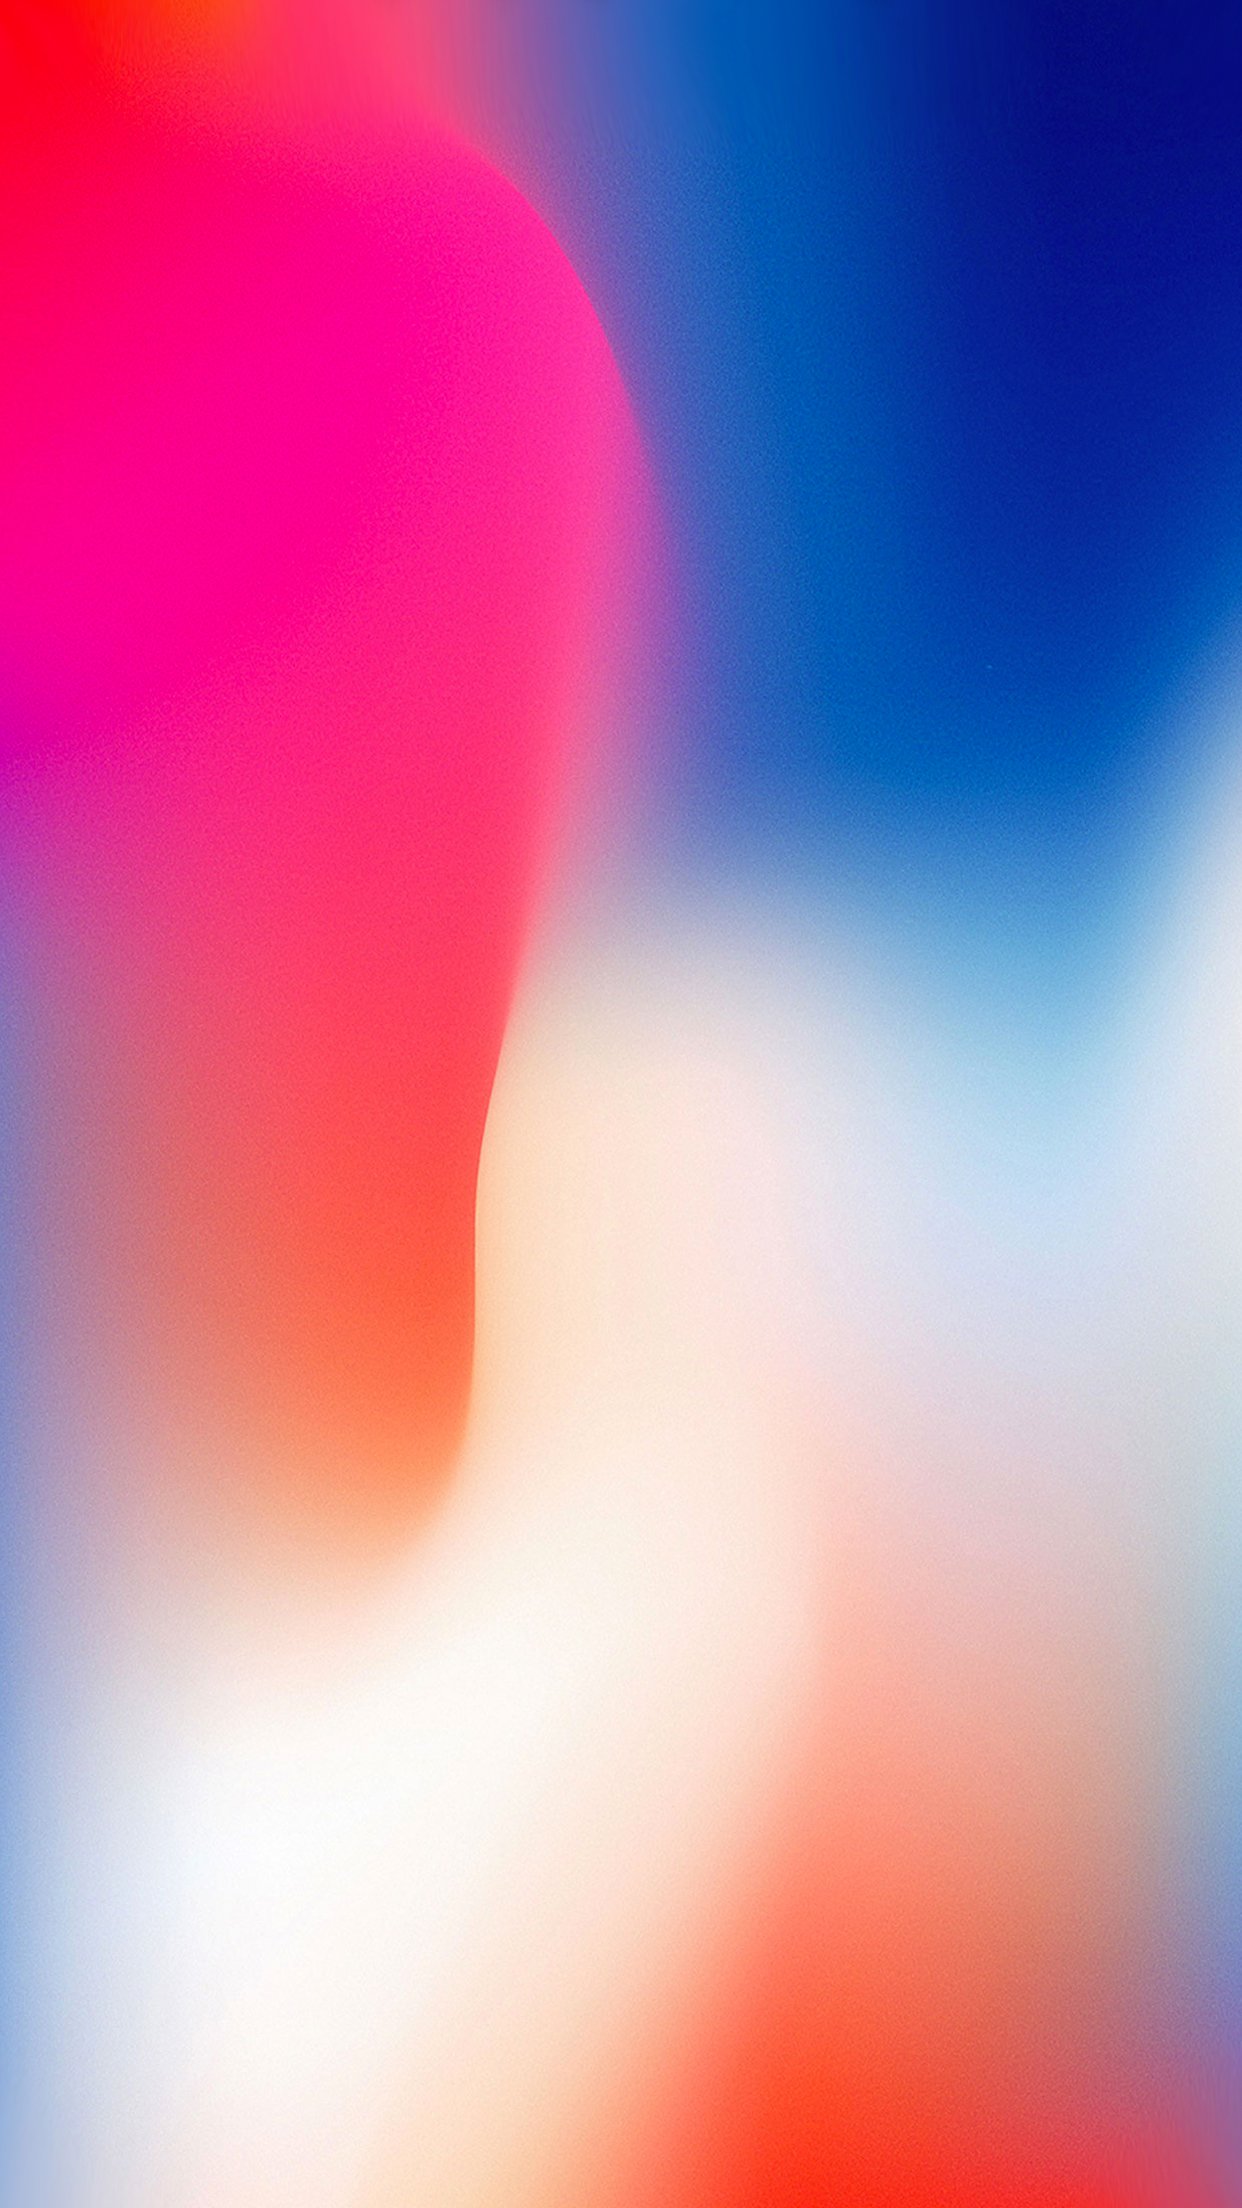 Download iPhone X Wallpapers Featured On Apples Website Here